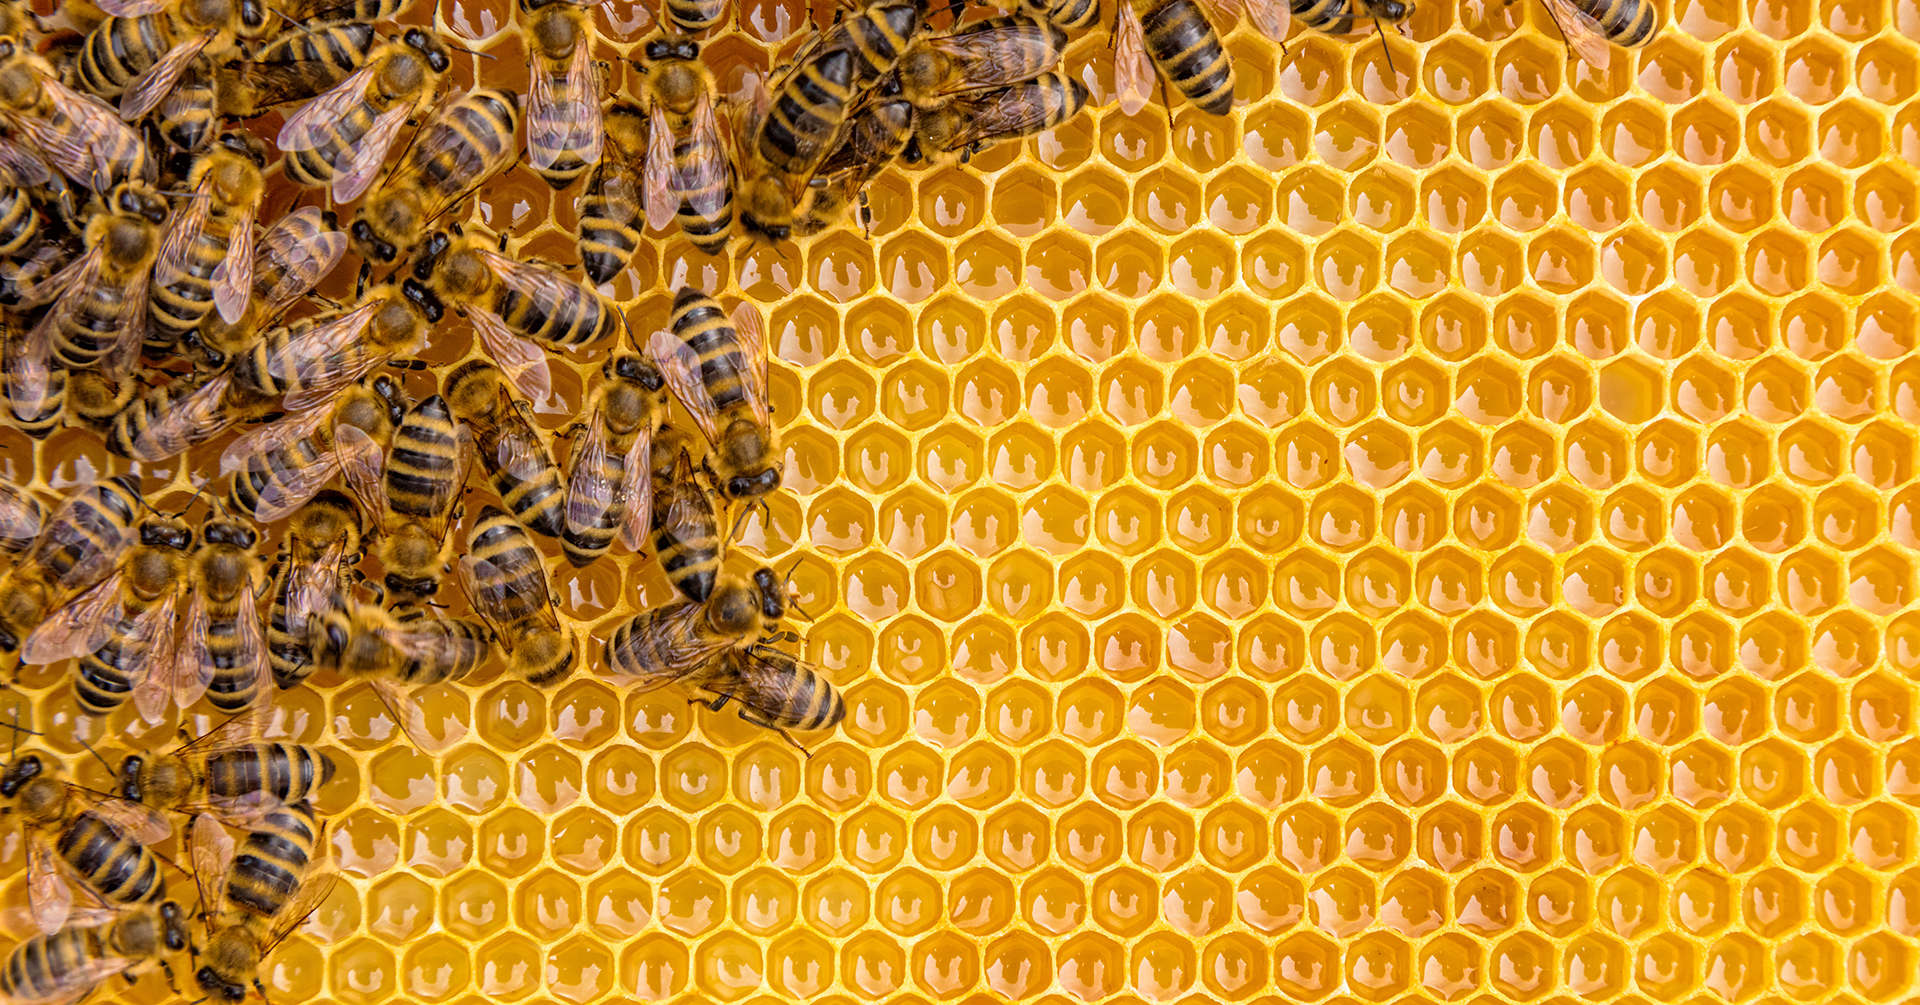 Close up view of the working bees on honey cells